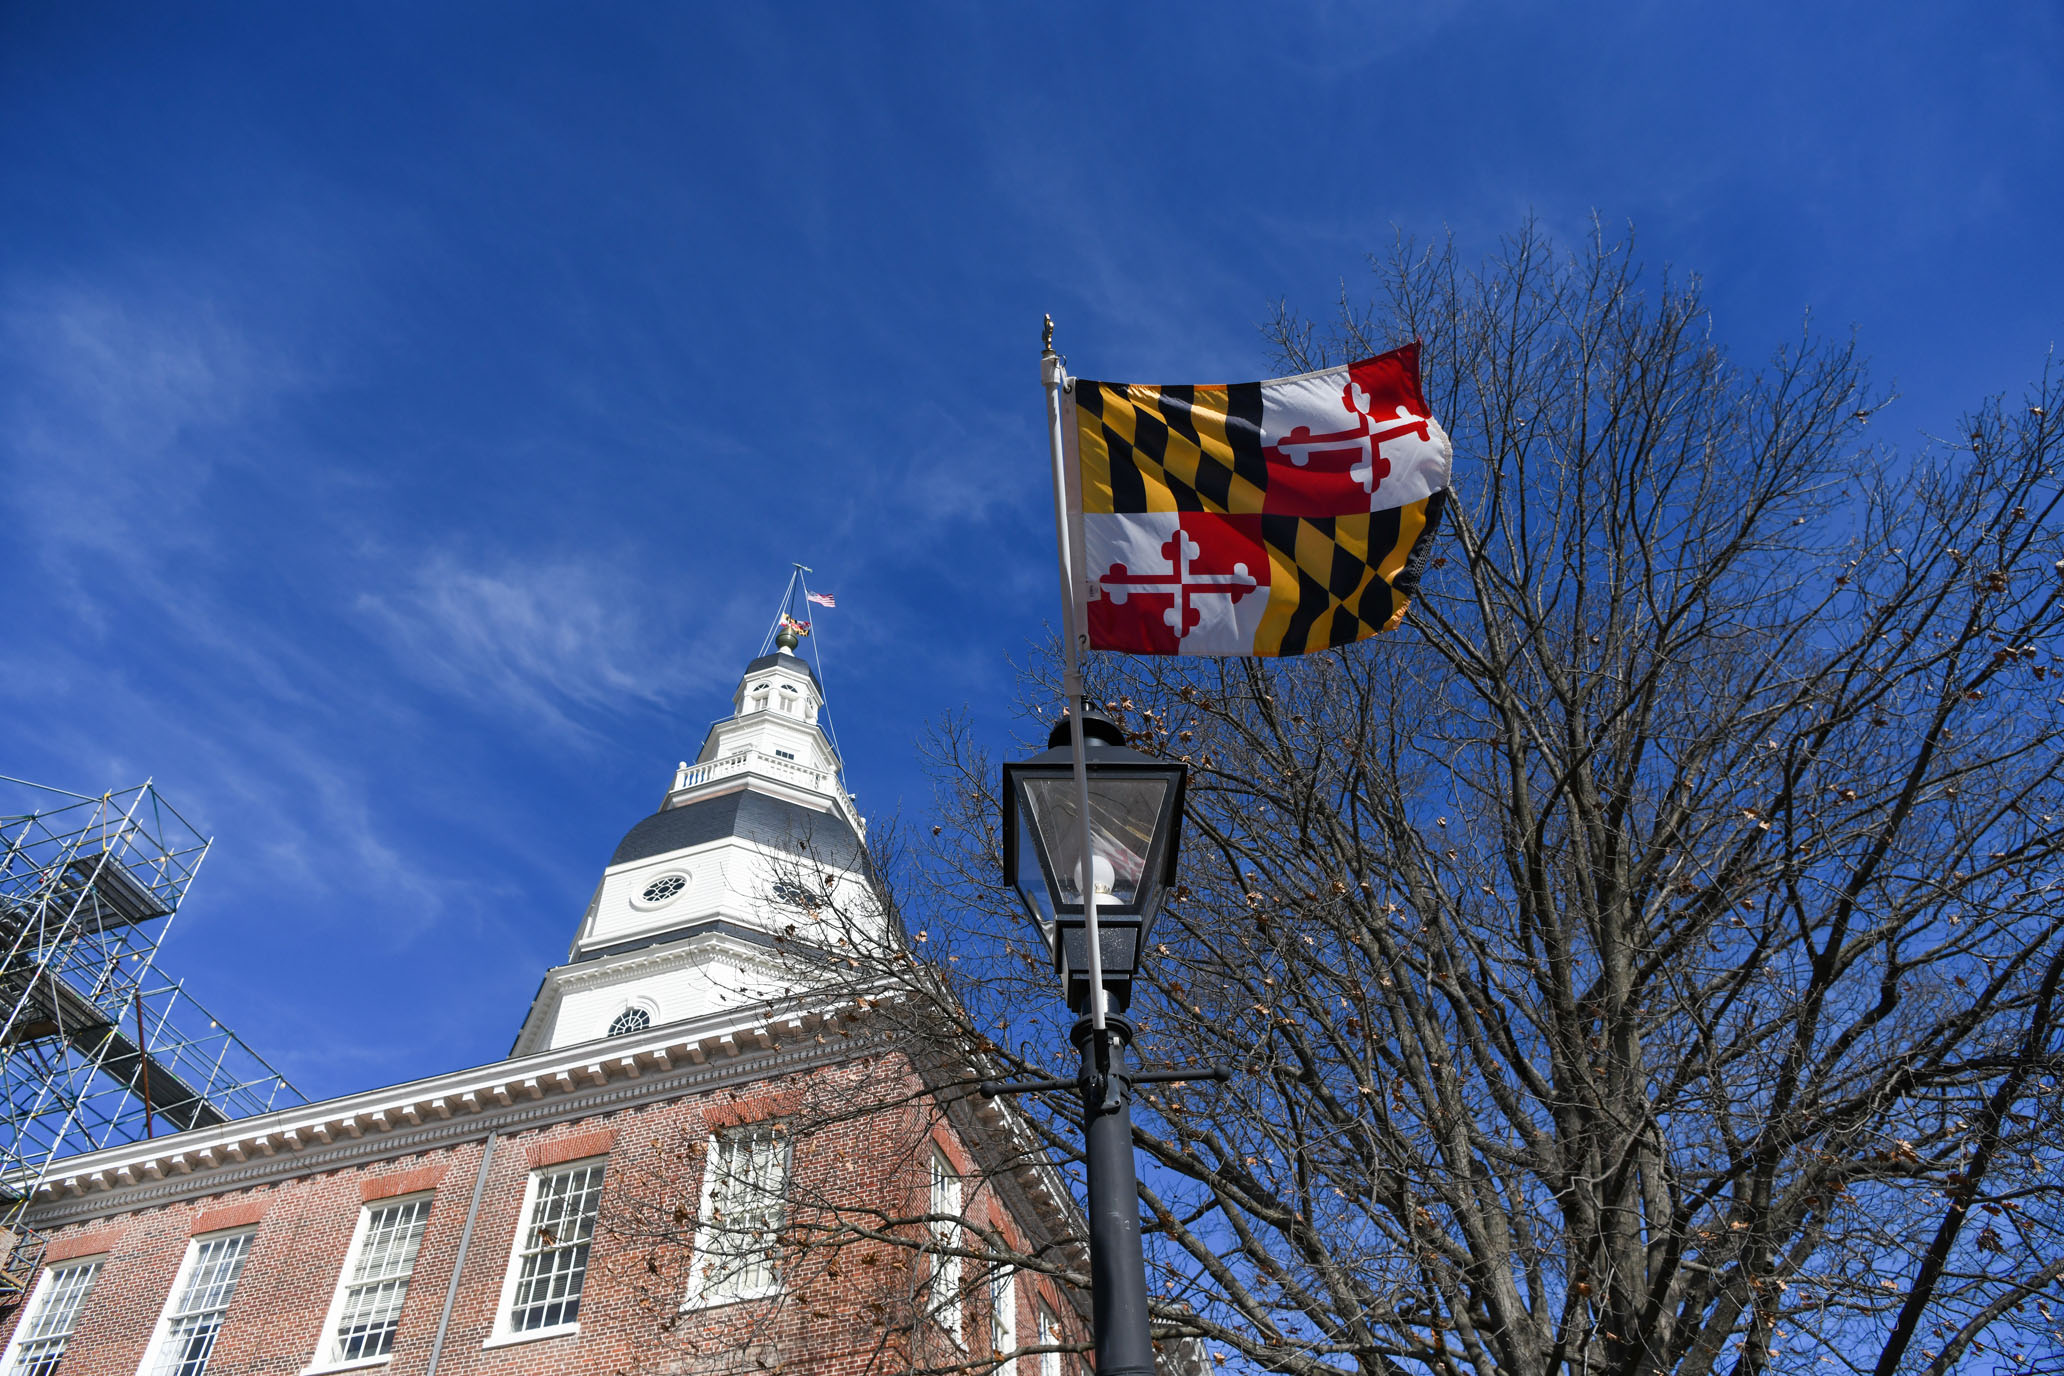 Downtown Annapolis capital building and Maryland state flag.